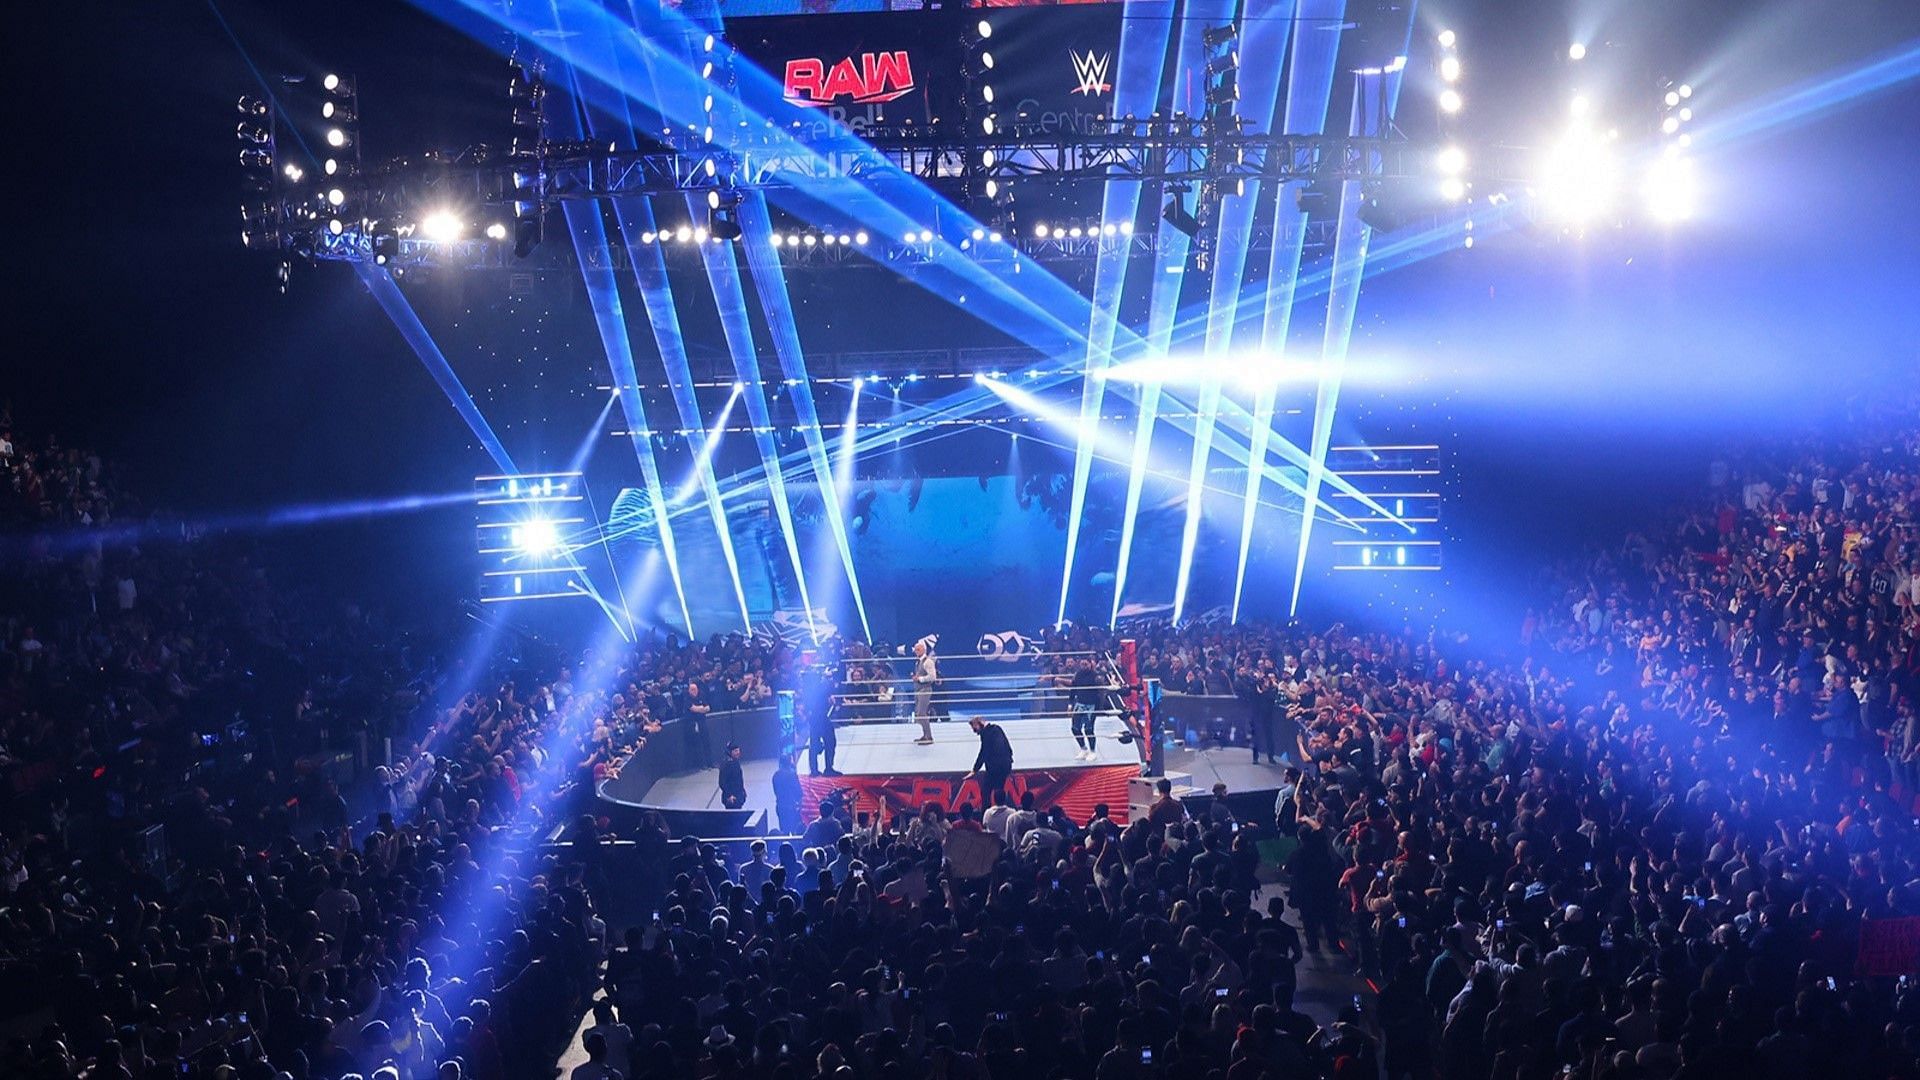 The WWE Universe packs the arena at a live RAW taping